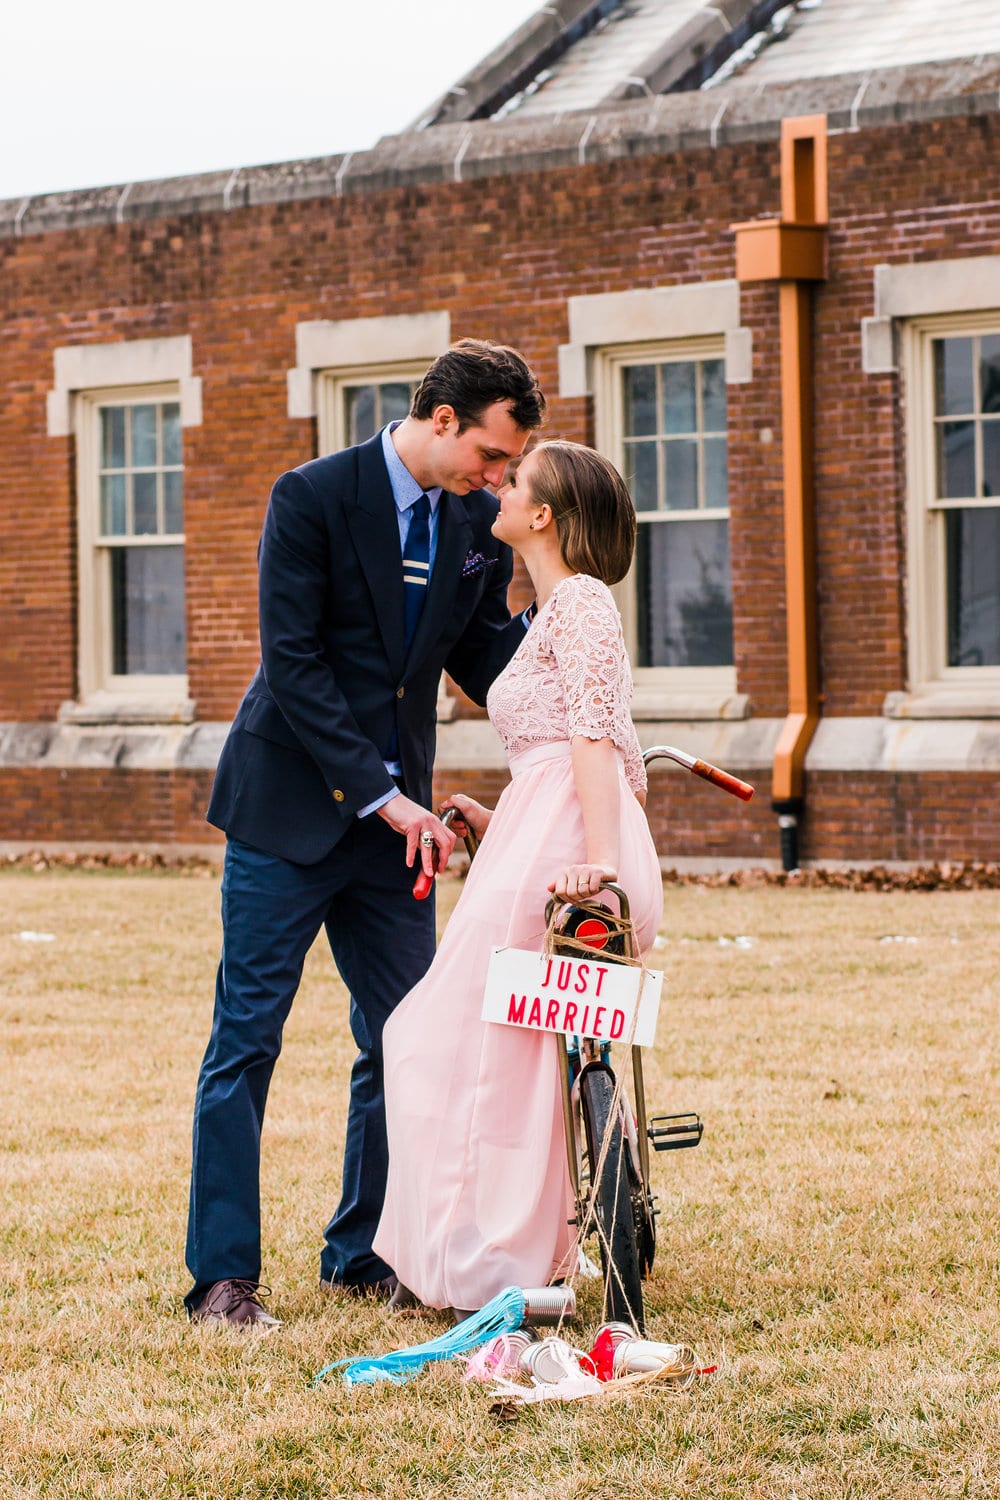  Stranger Things themed wedding at 1899 wedding venue in Indianapolis, Indiana 